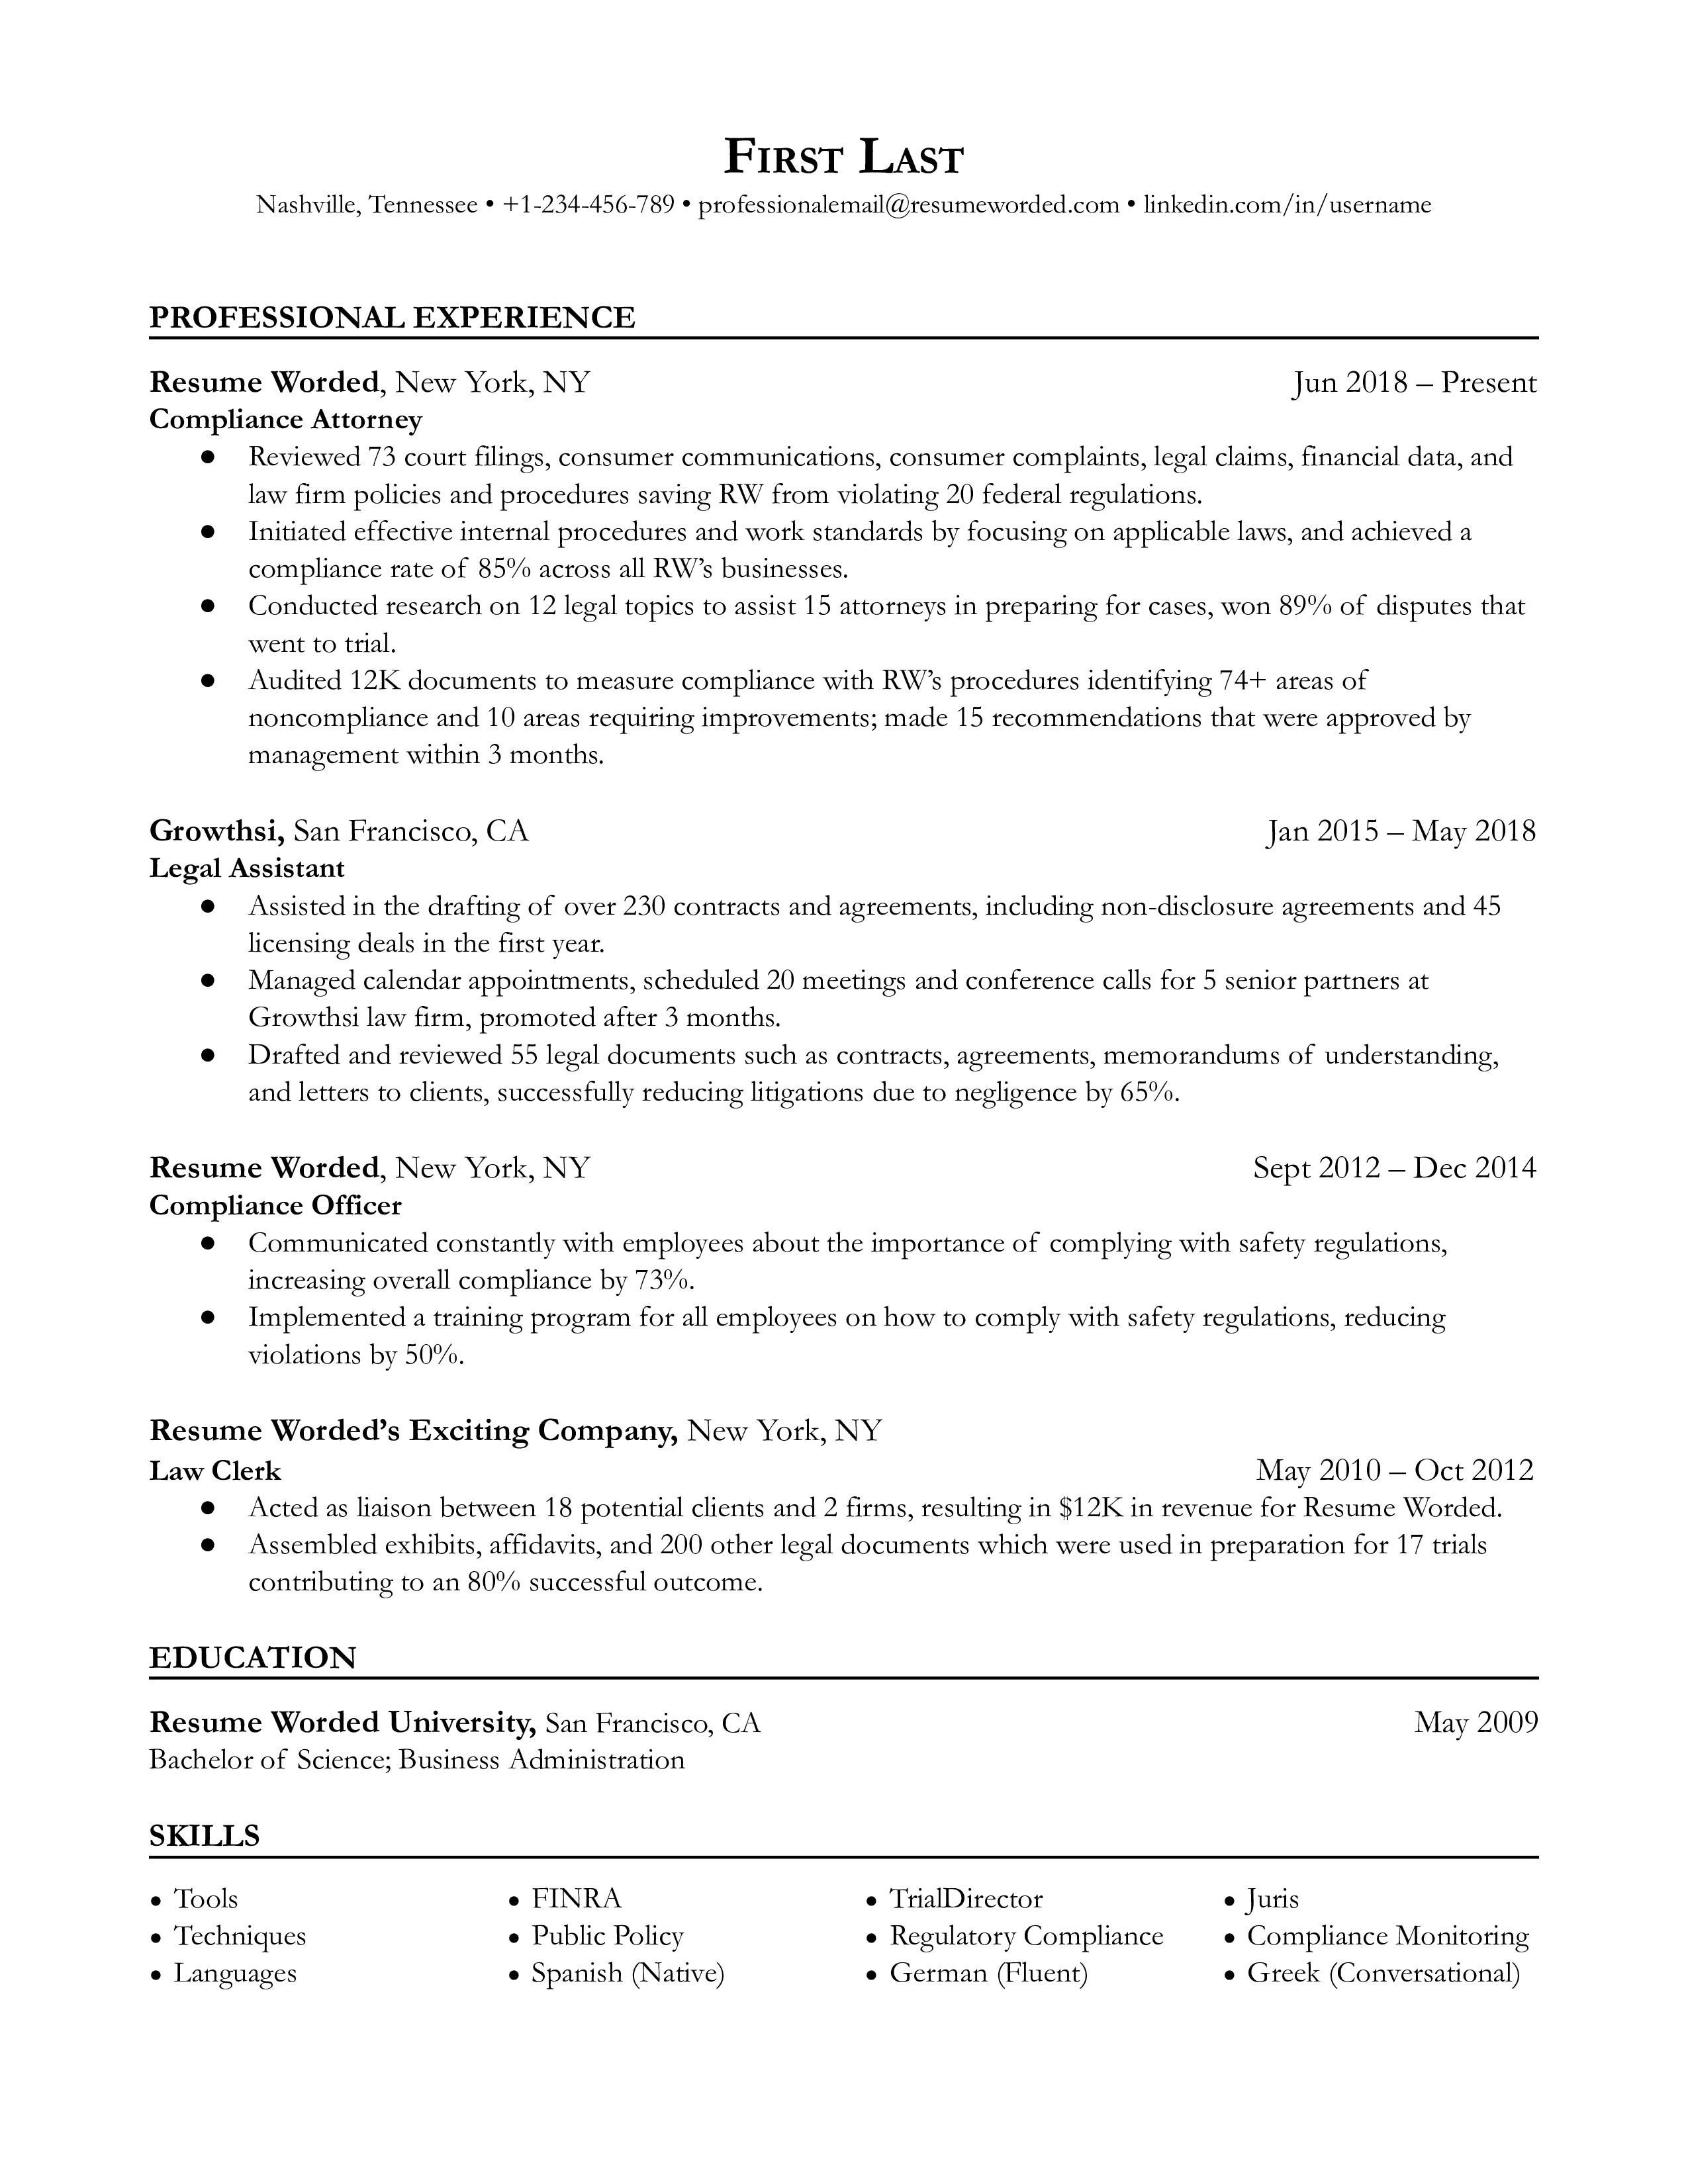 Compliance attorney resume example